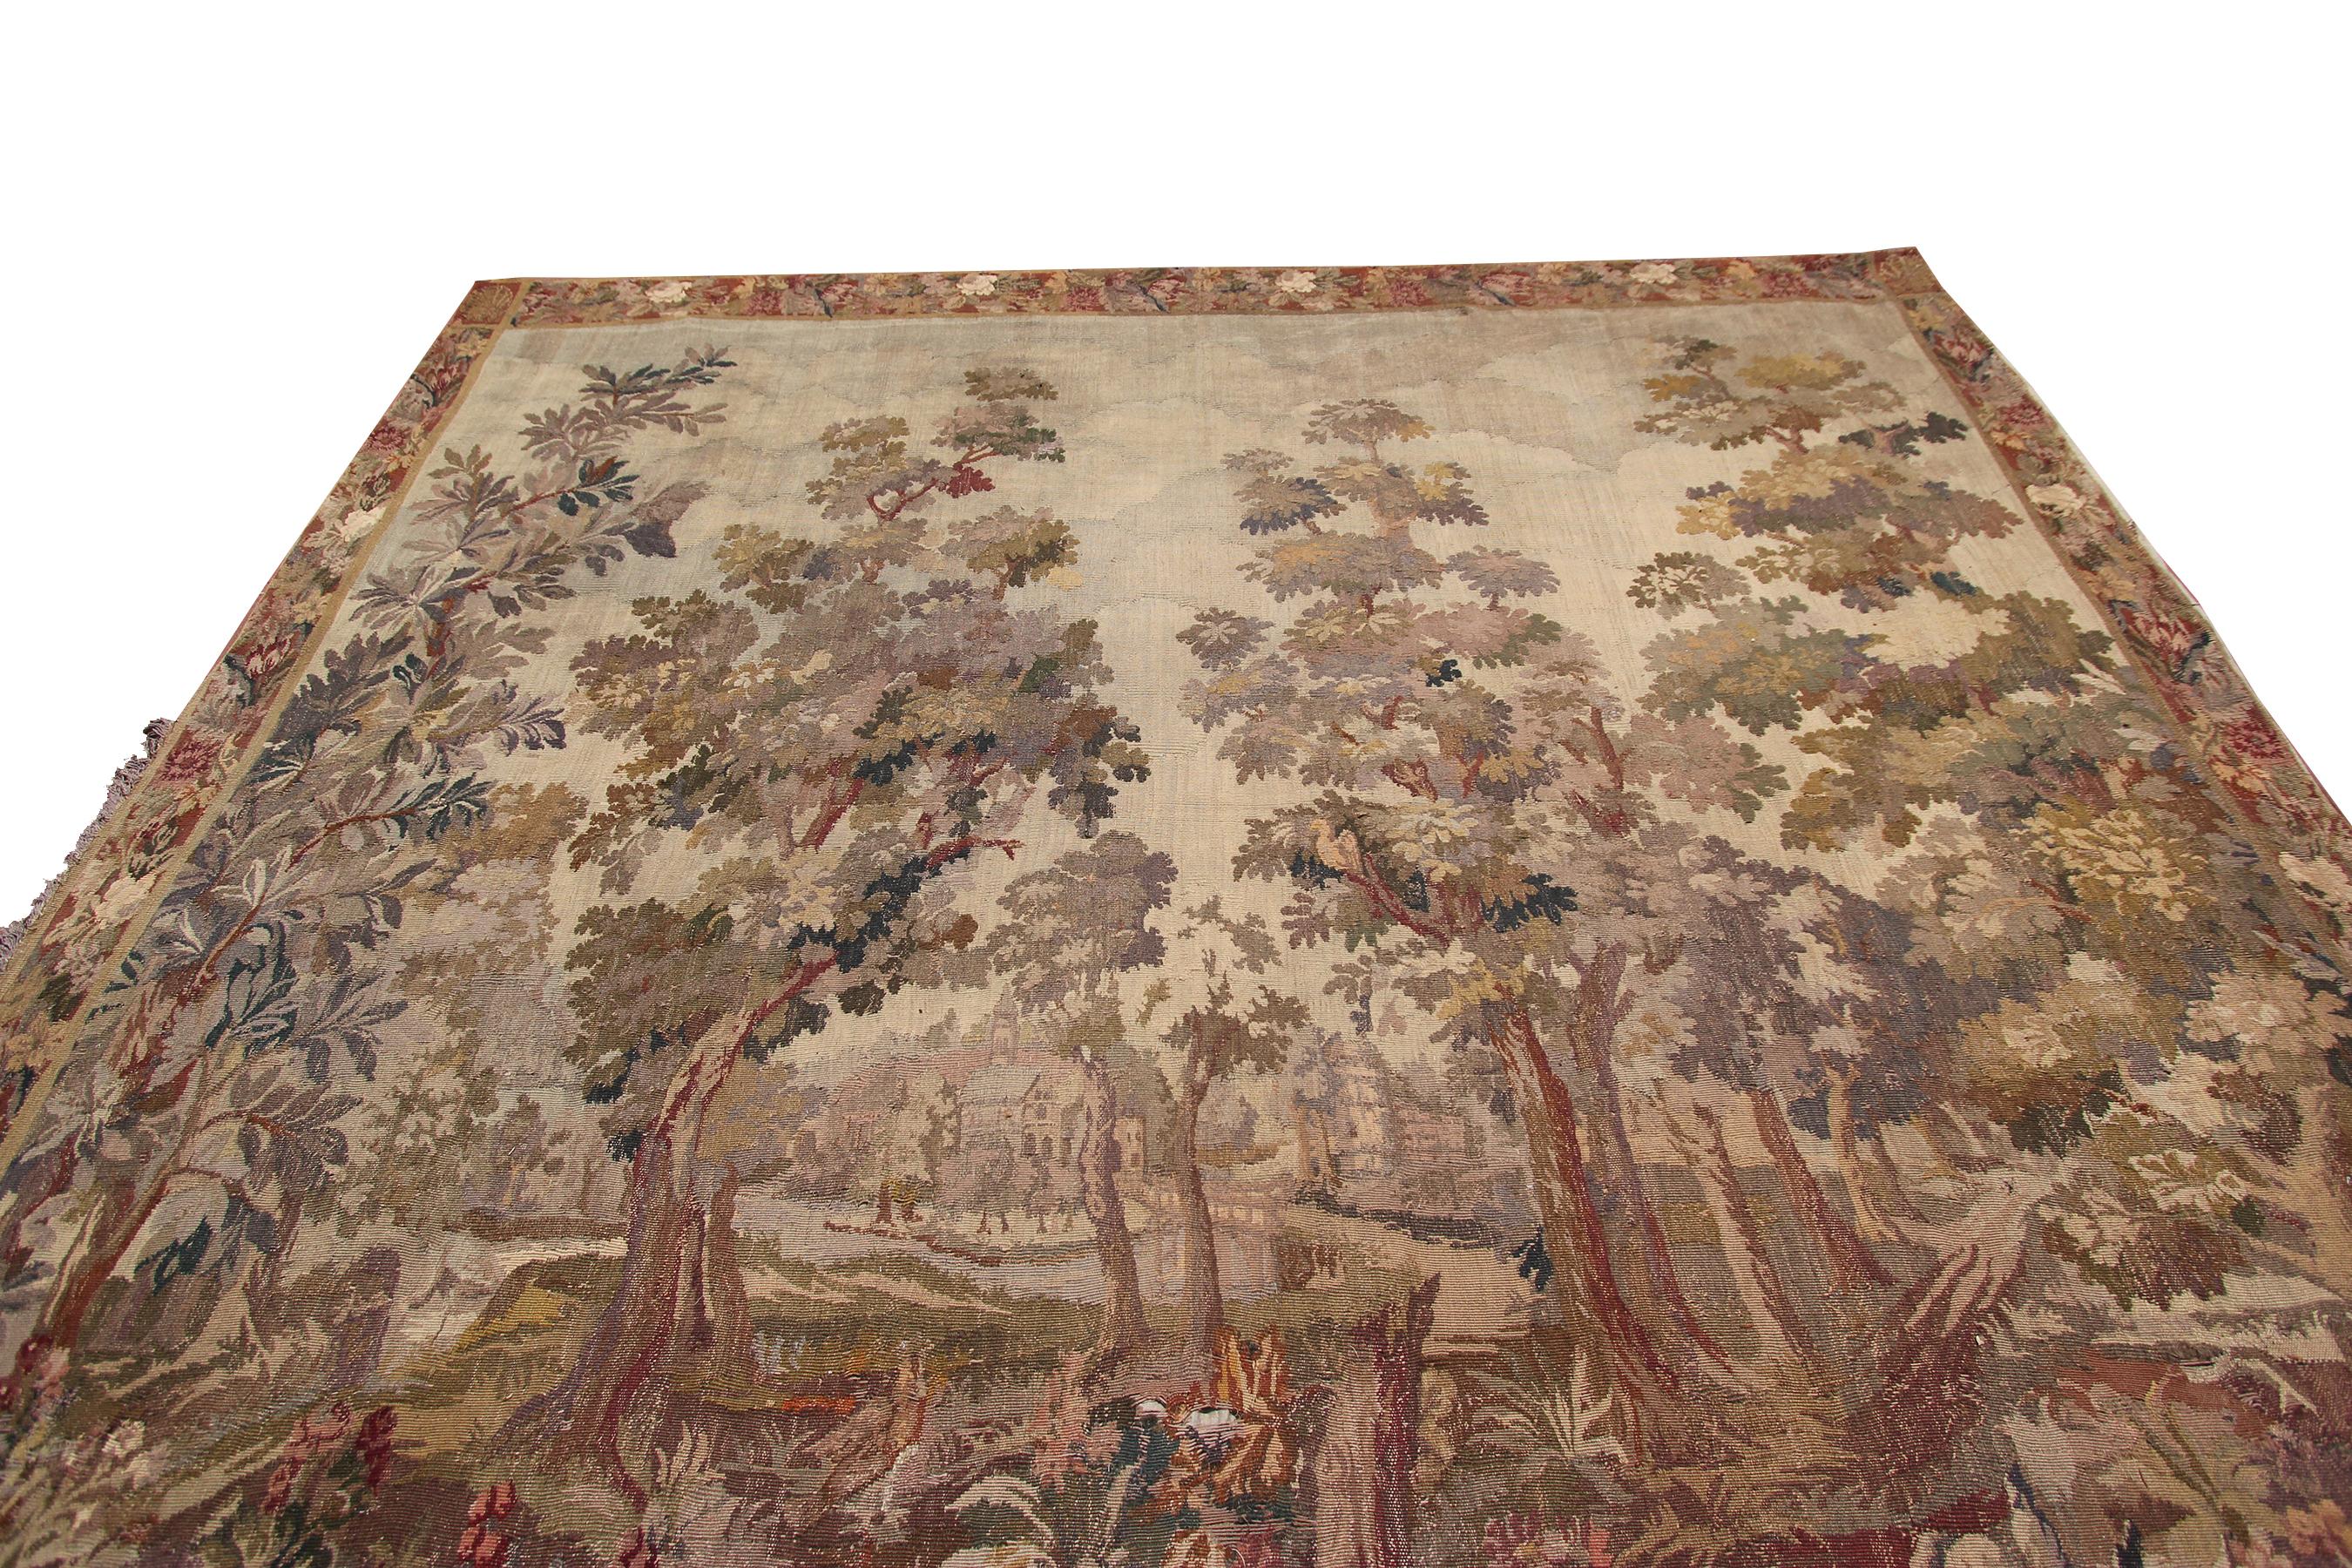 1890 Handmade Antique French Tapestry Large Tapestry Verdure 
10x11 
303cm x 336ccm

